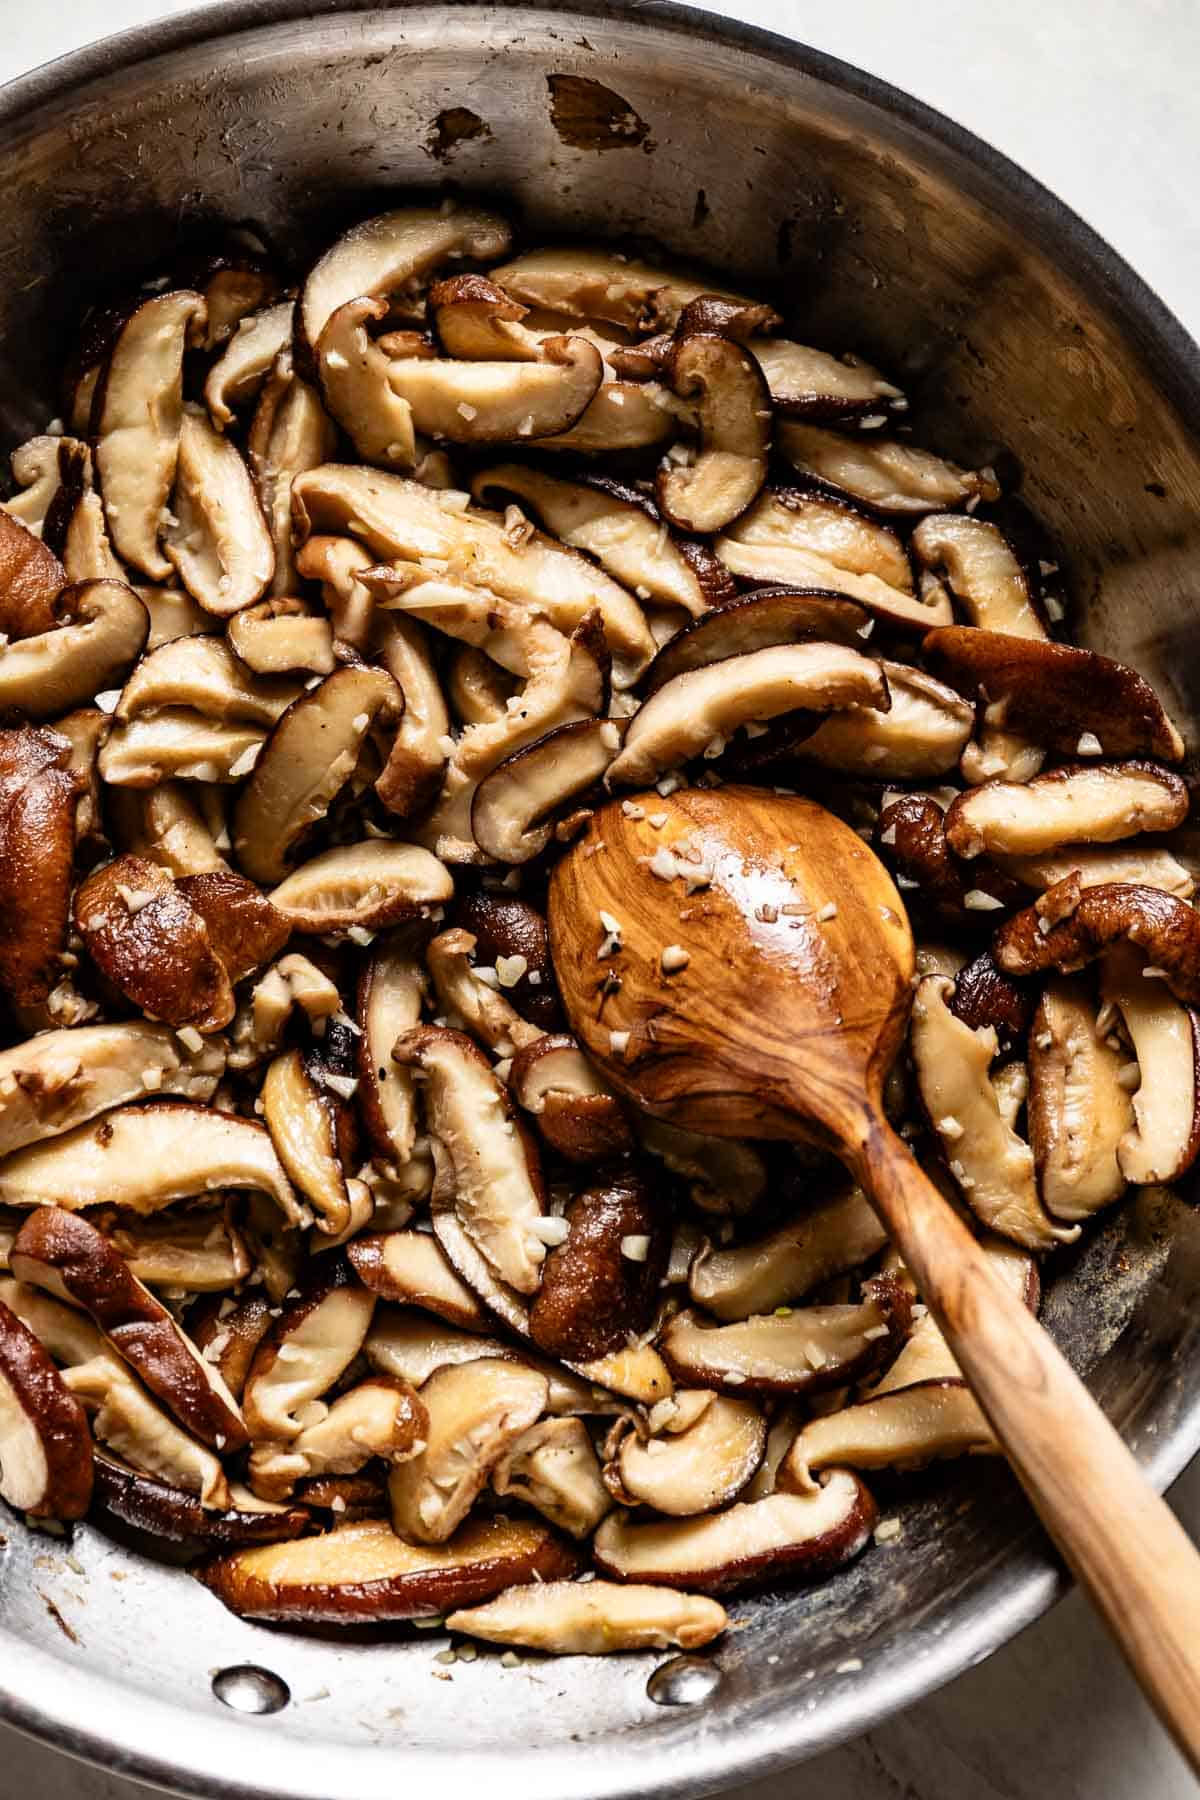 Shiitake mushrooms cooked in a skillet with a spoon on the side from the top view.